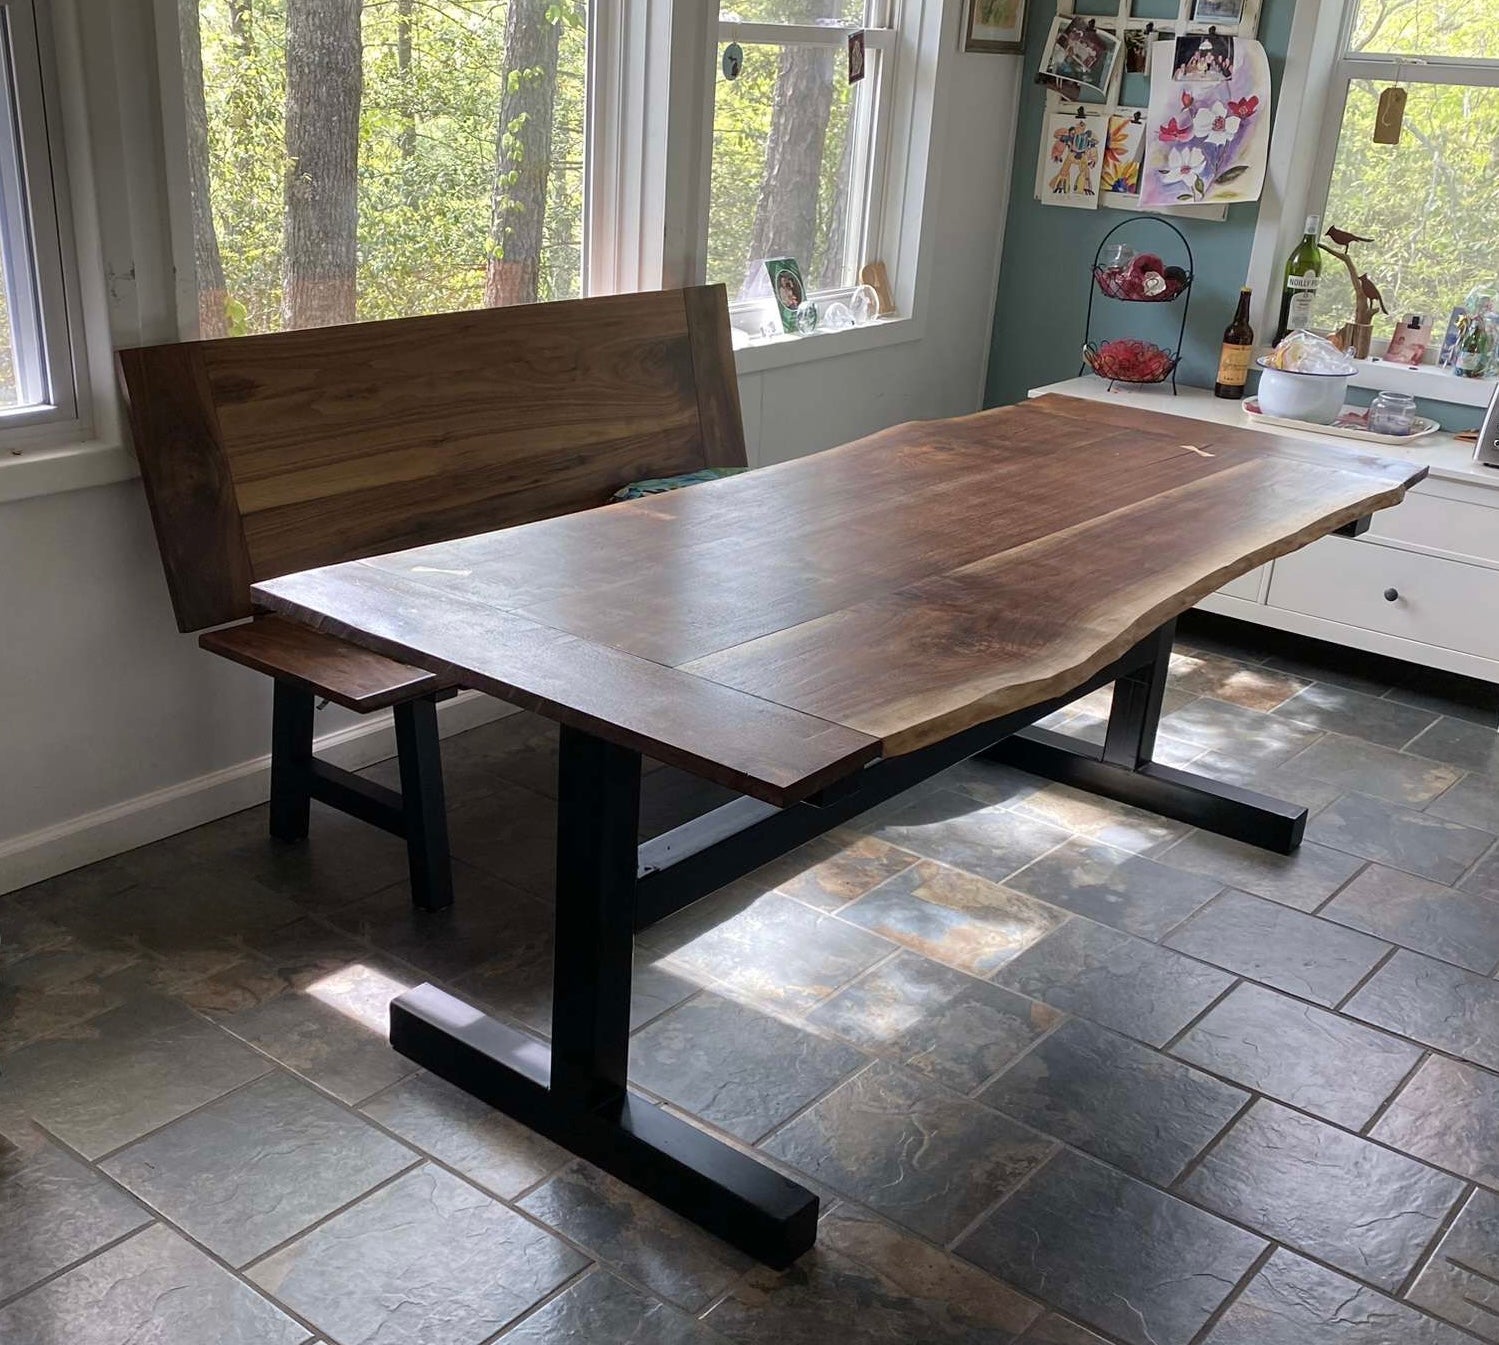 Live edge dining table and bench made of black walnut and custom metal legs.